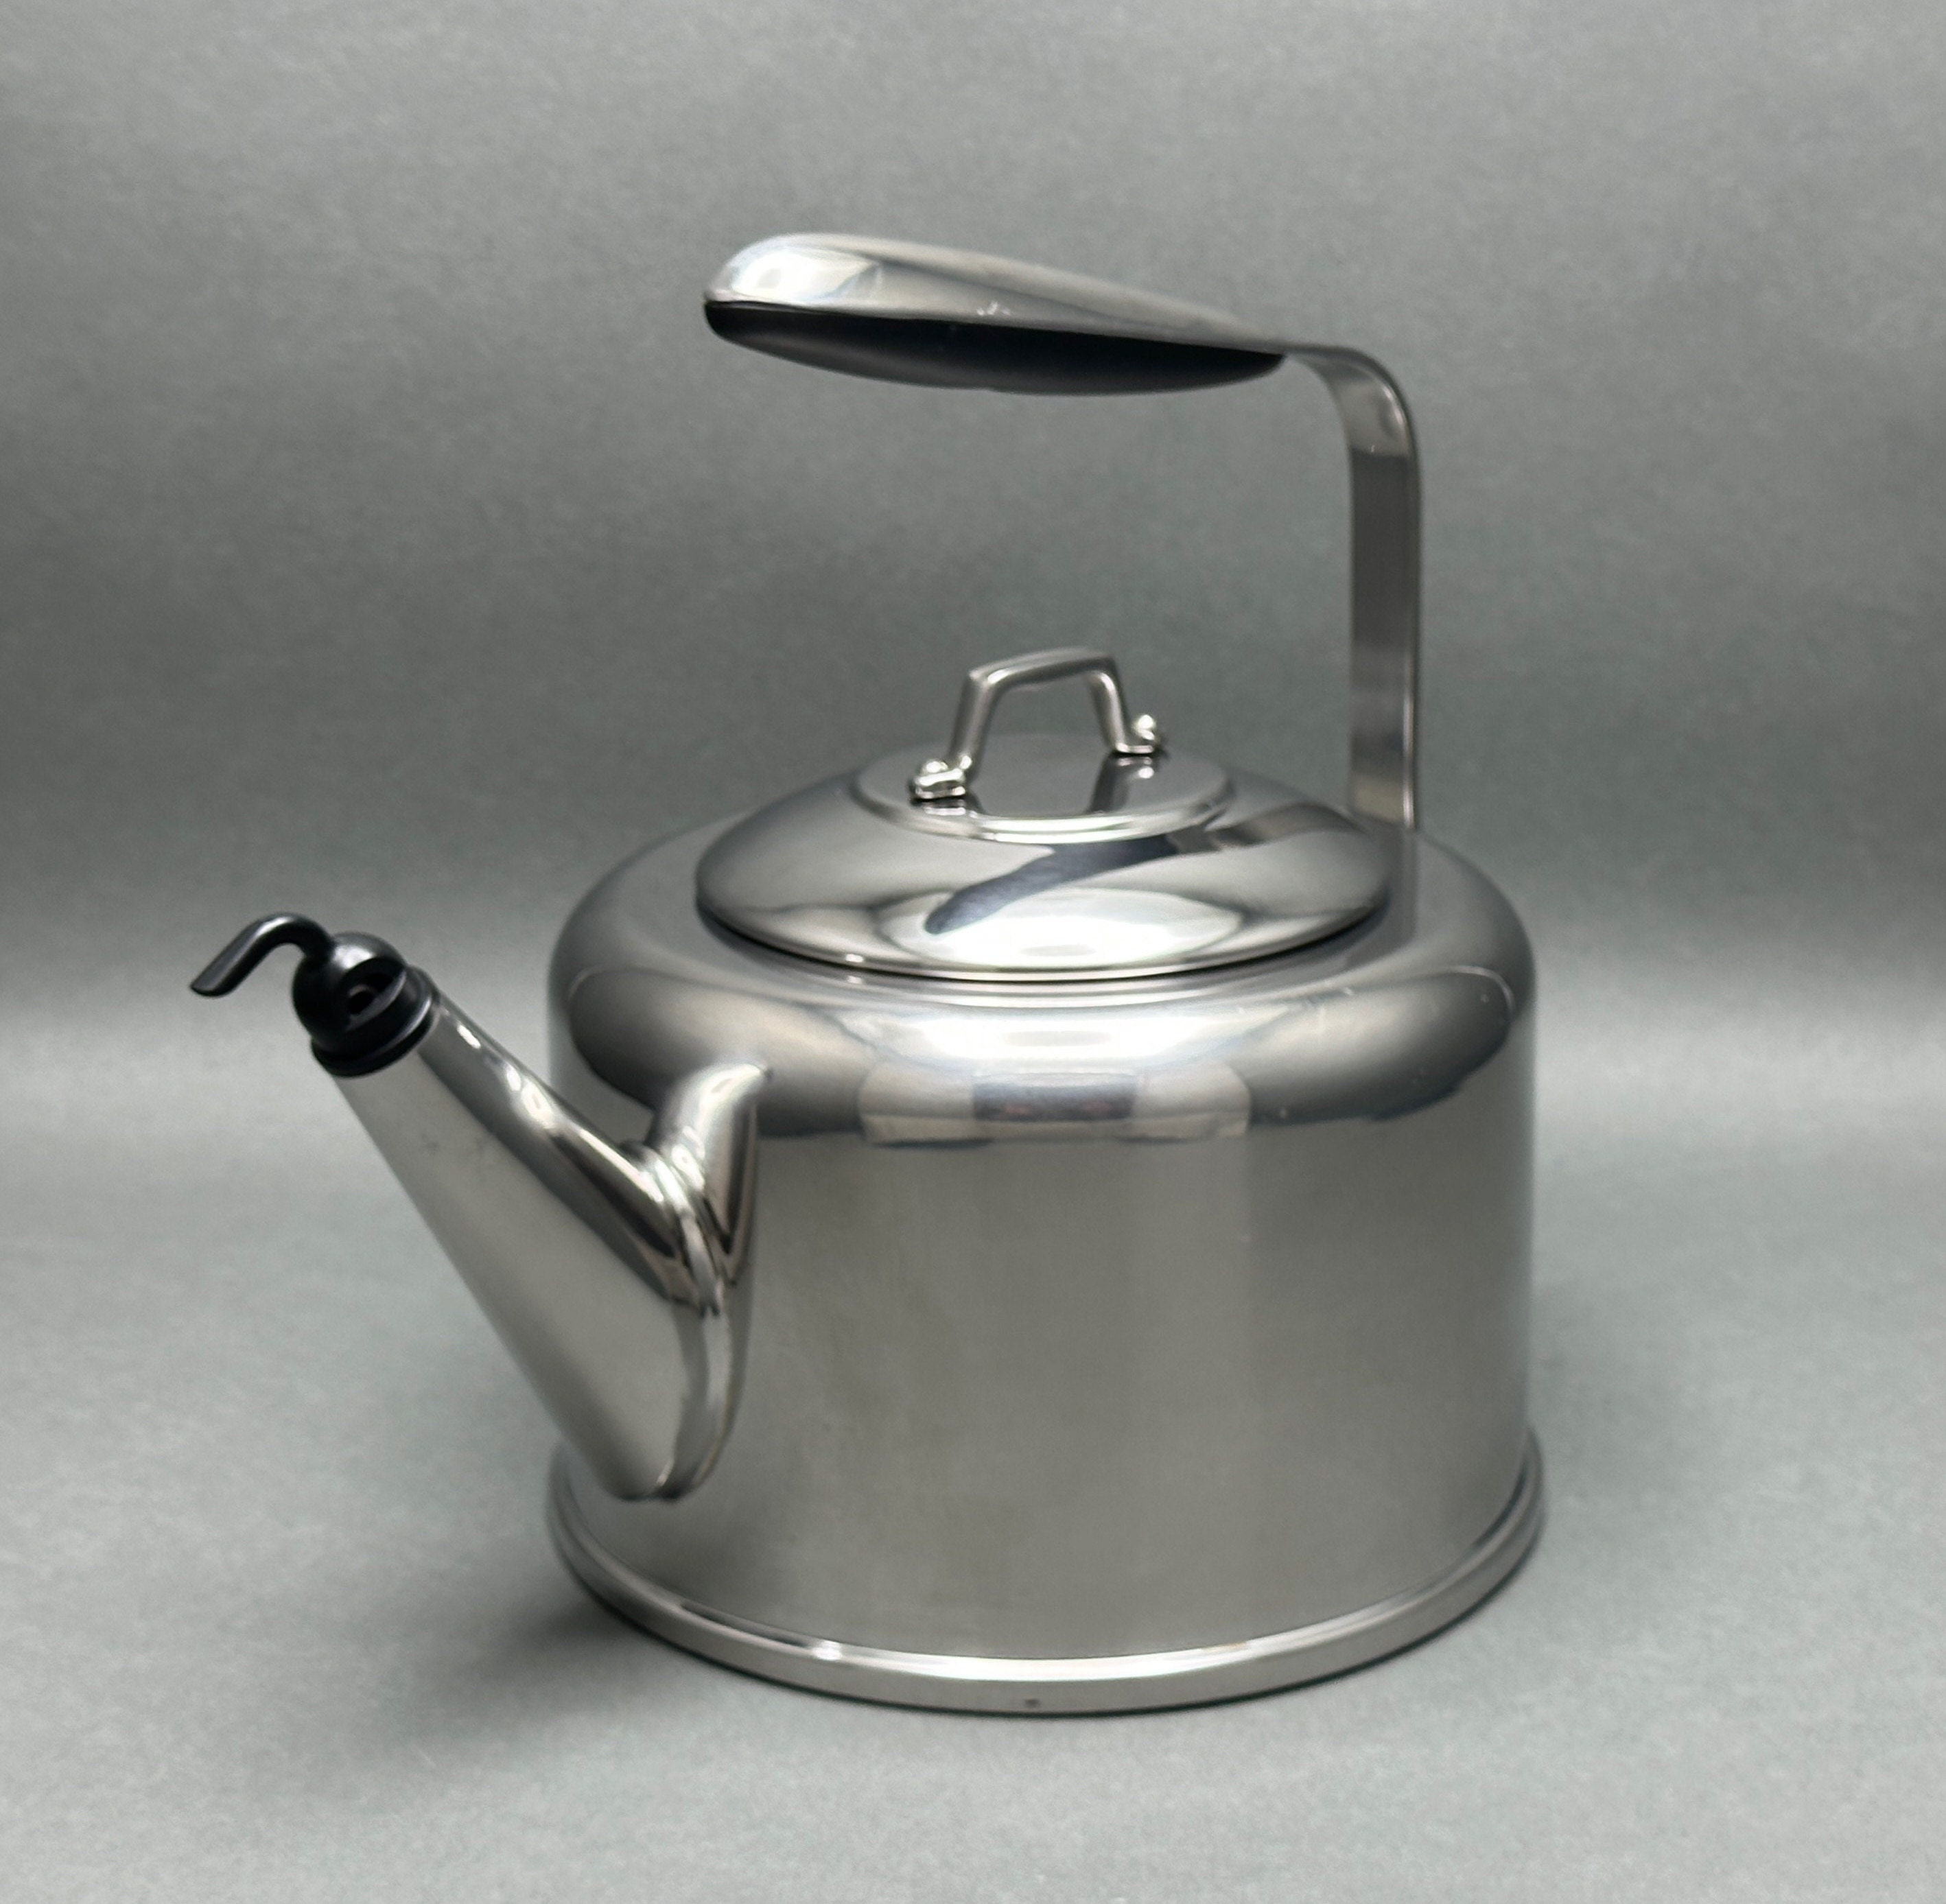 Vintage ALL-CLAD Stainless Steel 2 Qt. Whistling Tea Kettle With Lid